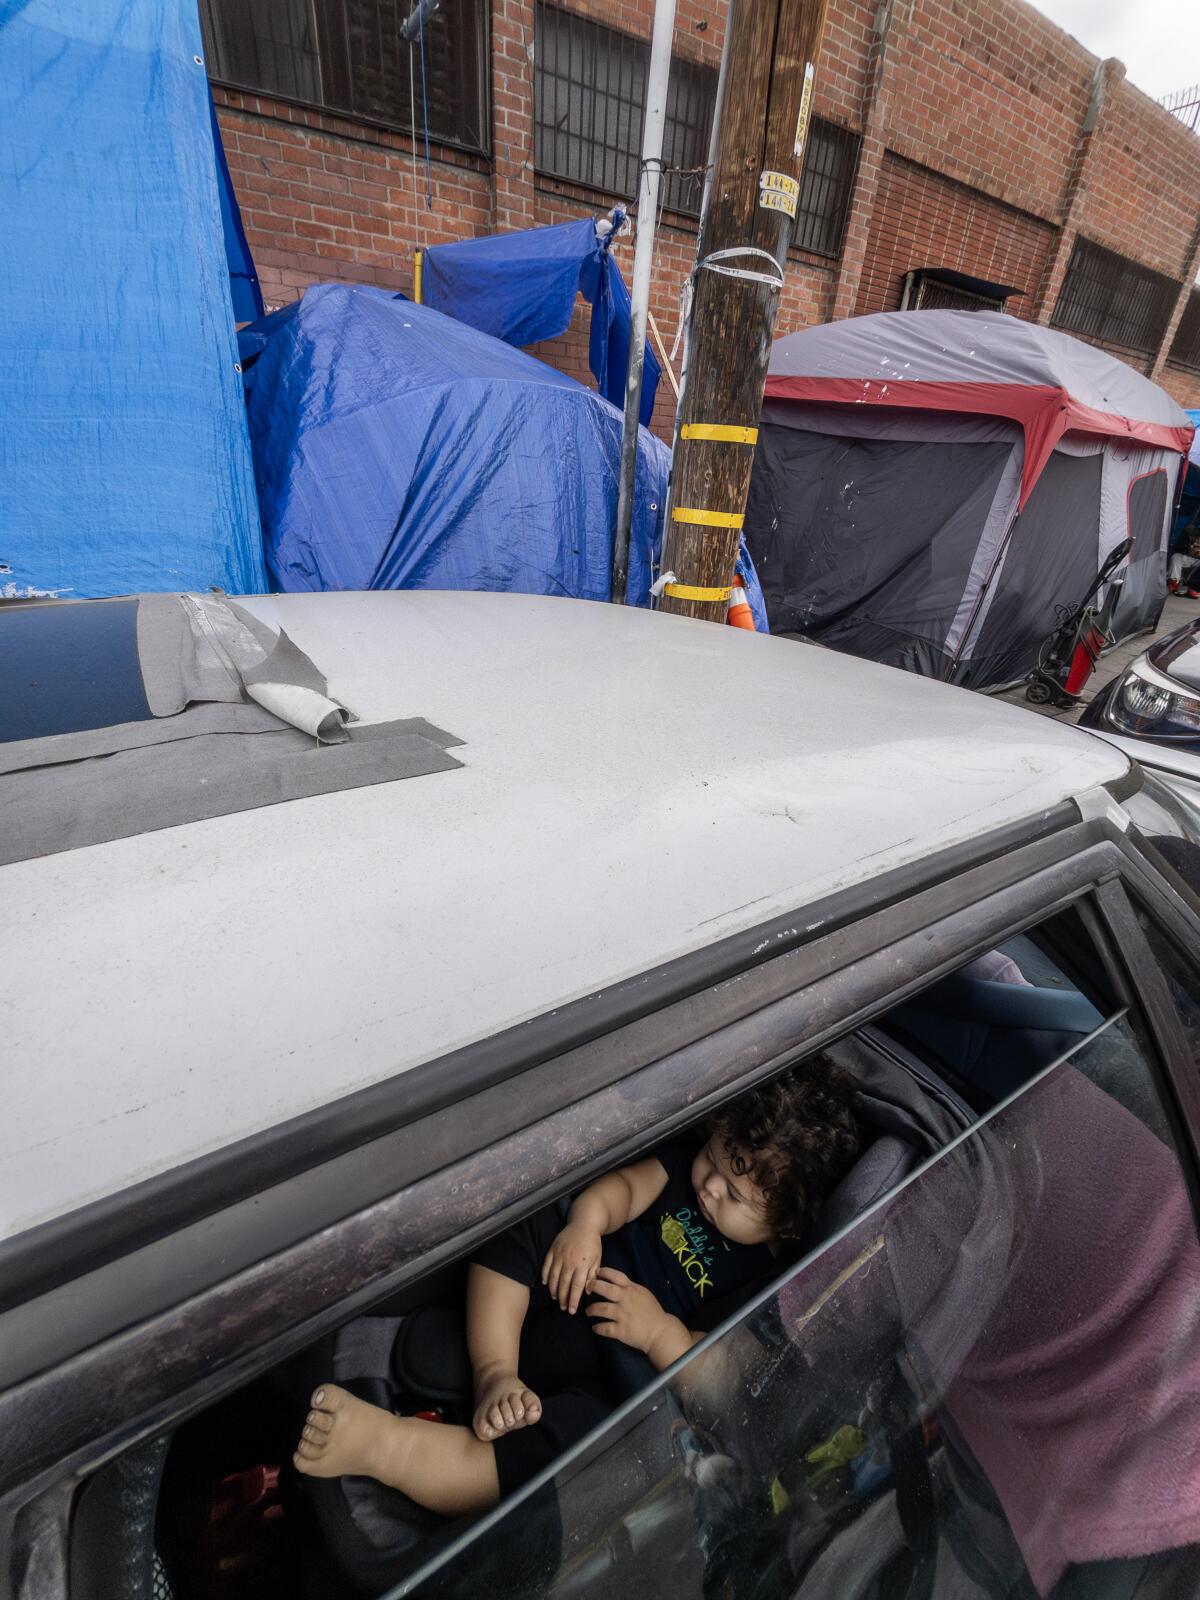 A young child is in a car with a window partly rolled down, with tents nearby.